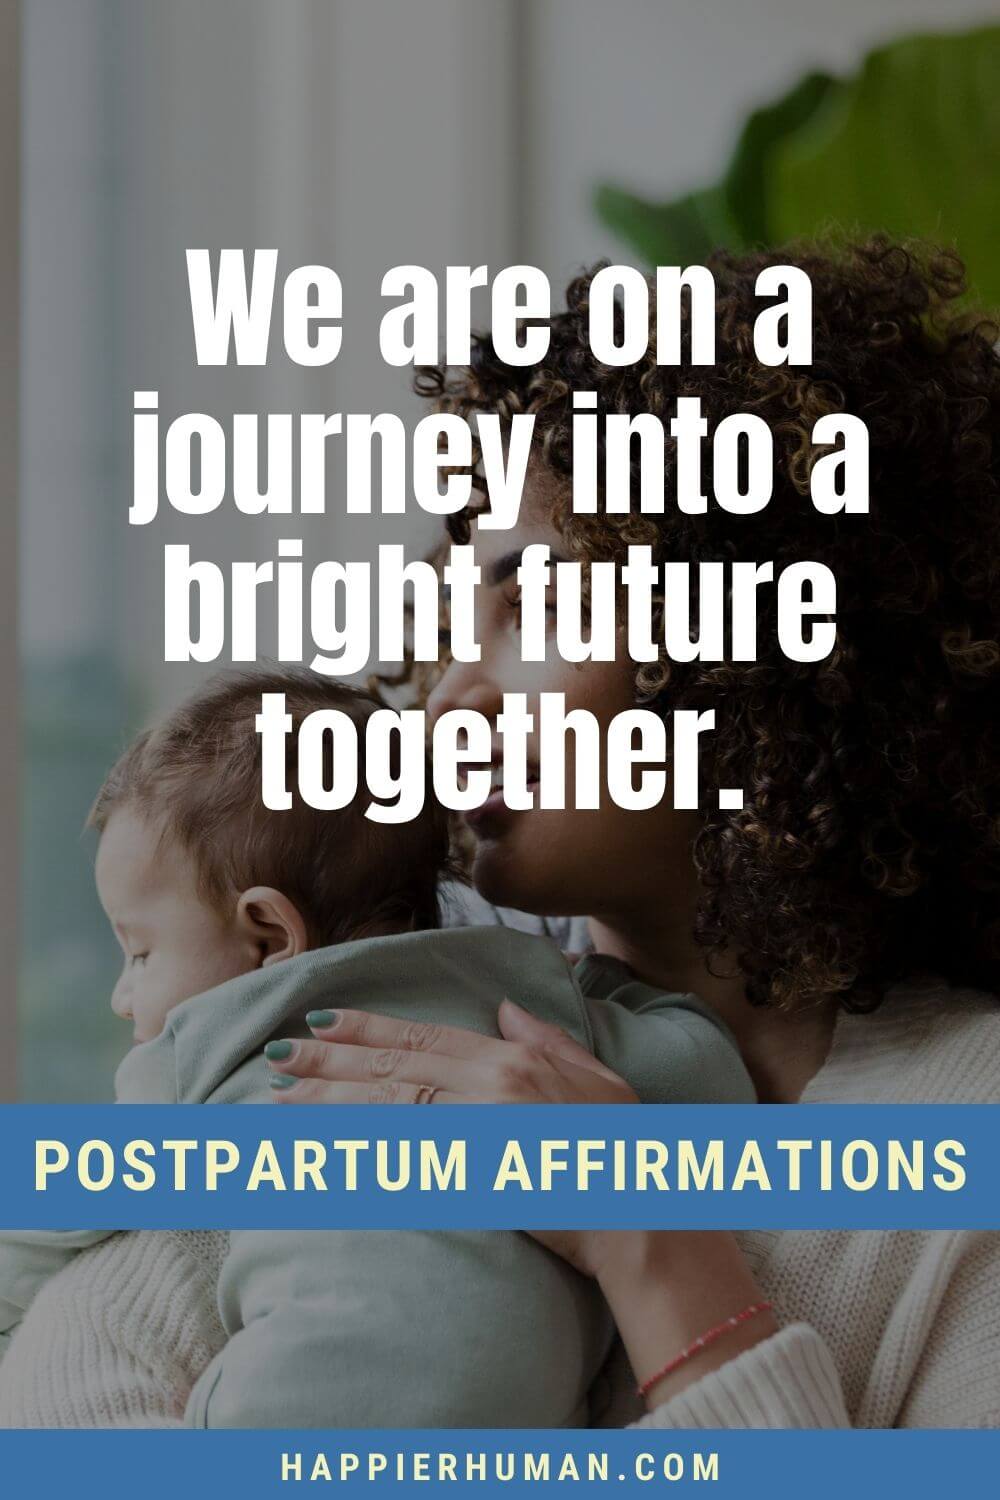 Postpartum Affirmations - We are on a journey into a bright future together. | affirmations for newborn baby | positive affirmations for parents | positive postpartum